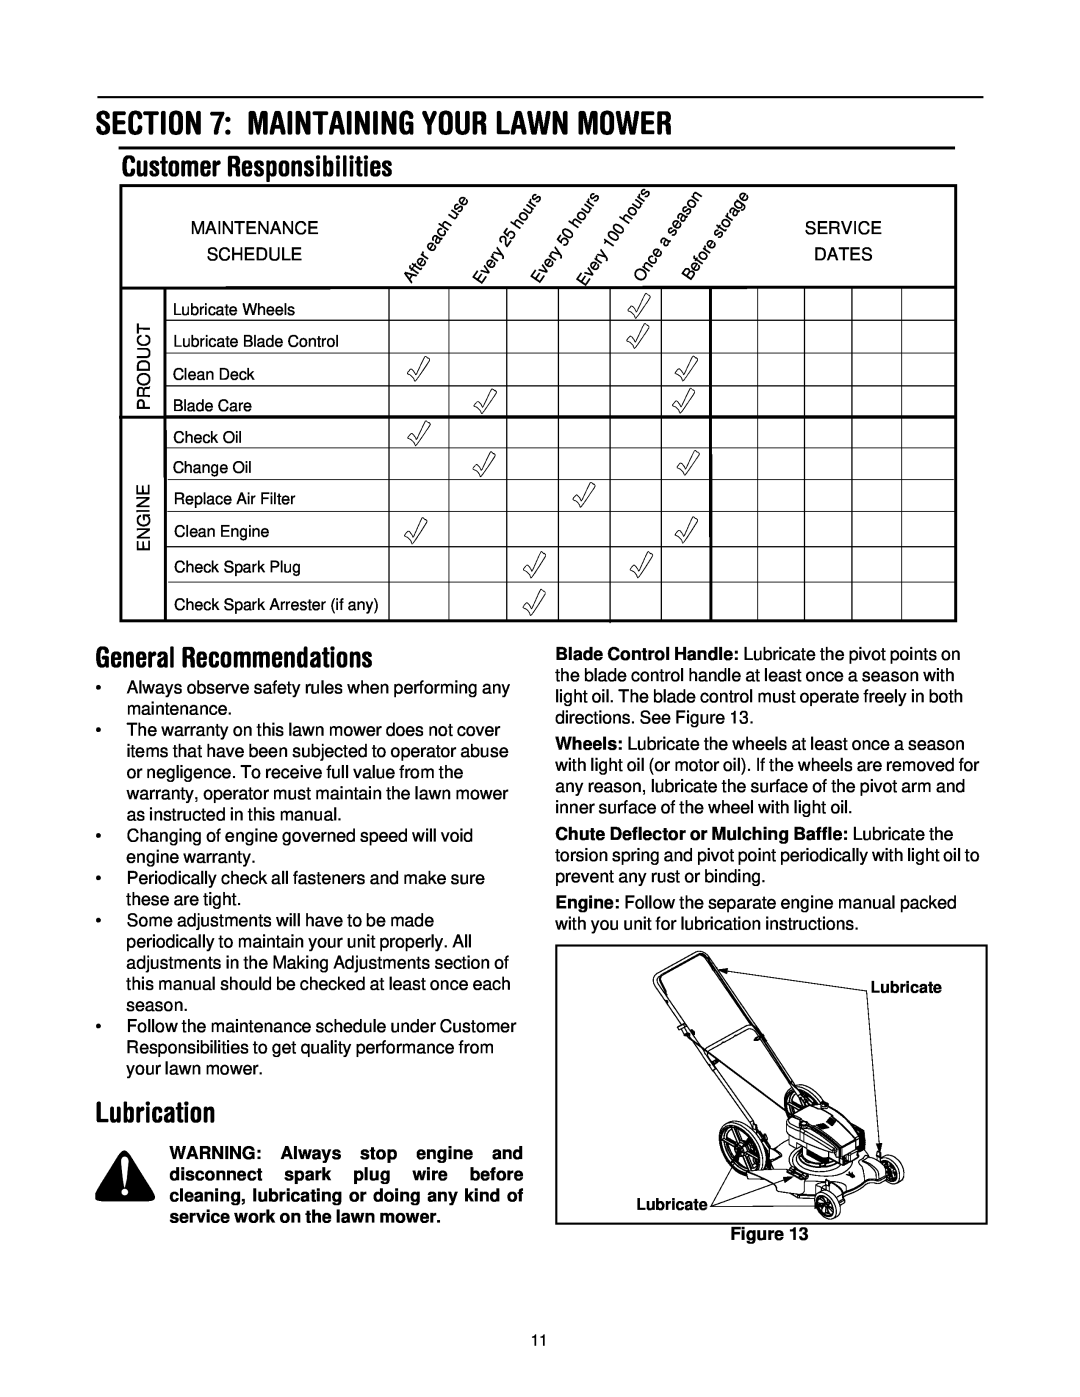 Yard-Man 503 manual Customer Responsibilities, General Recommendations, Lubrication, Maintaining Your Lawn Mower 